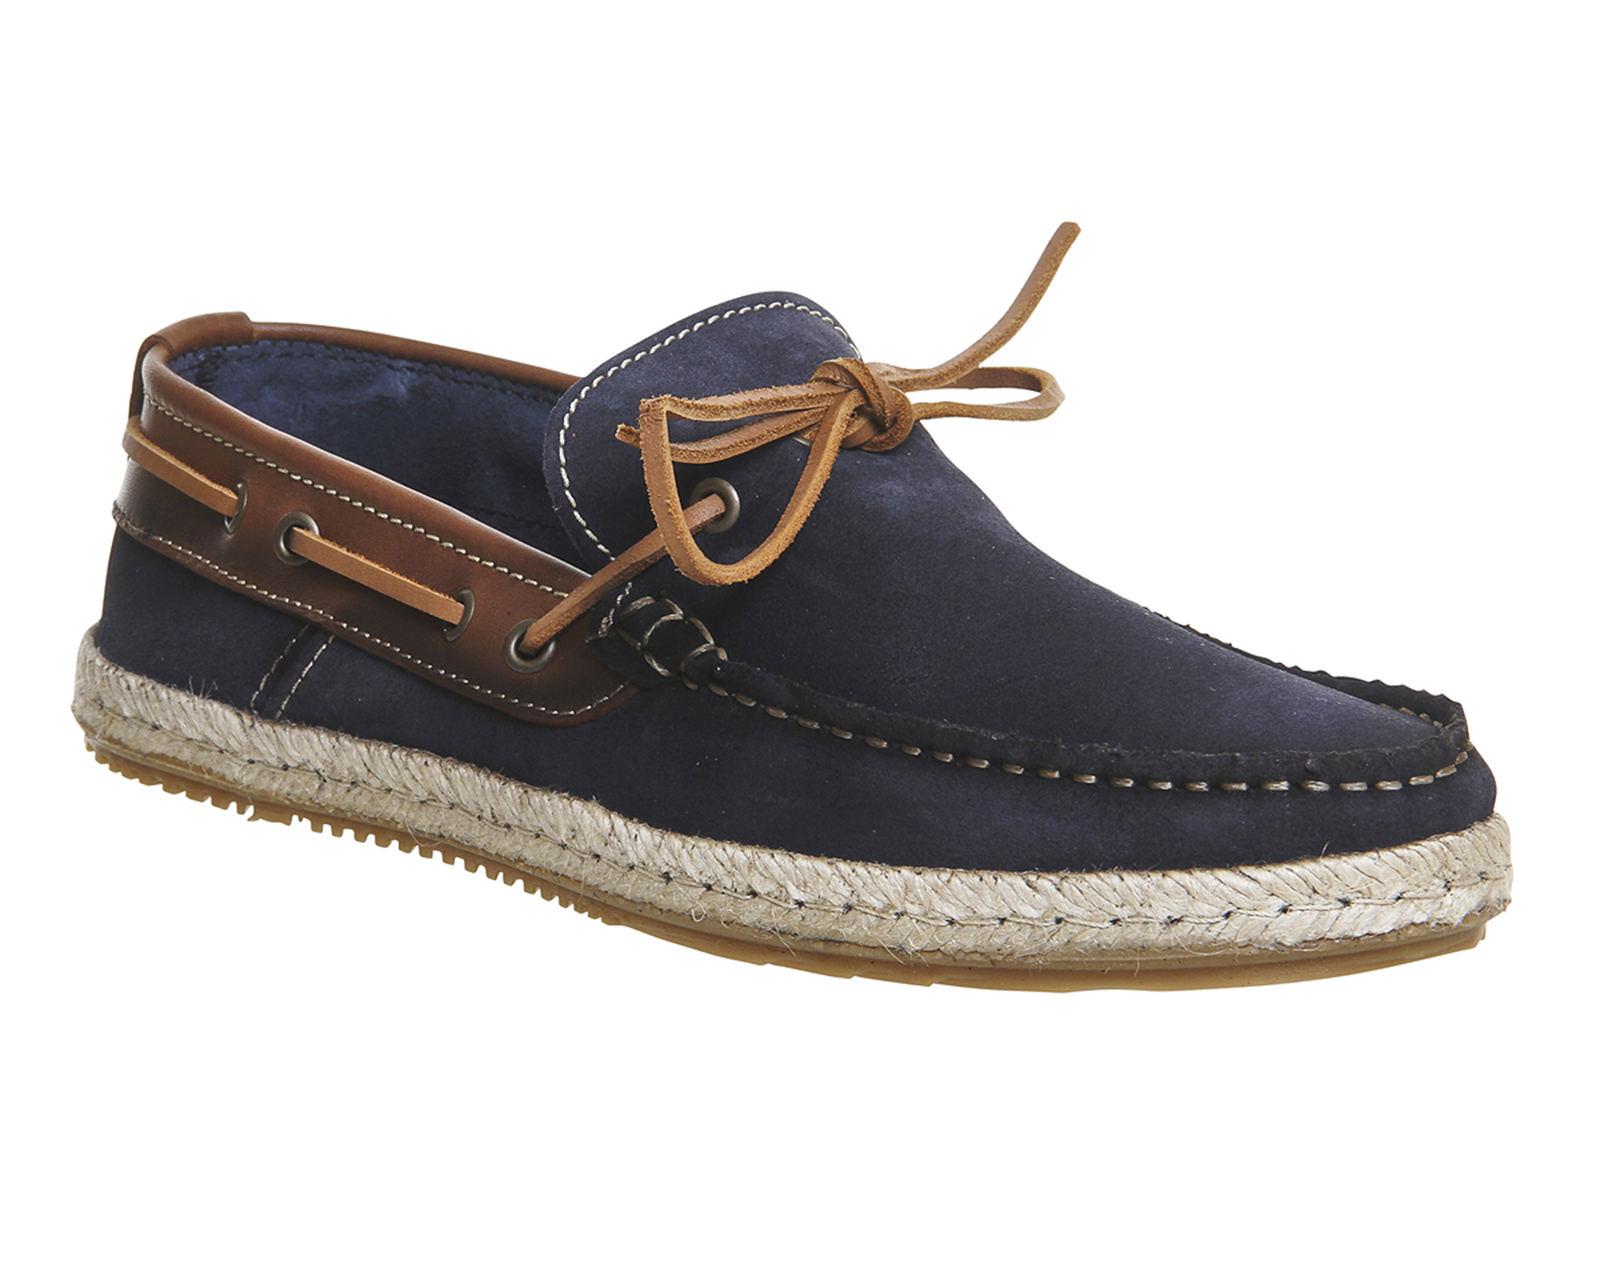 OFFICEDone Boat ShoesNavy Suede Tan Leather